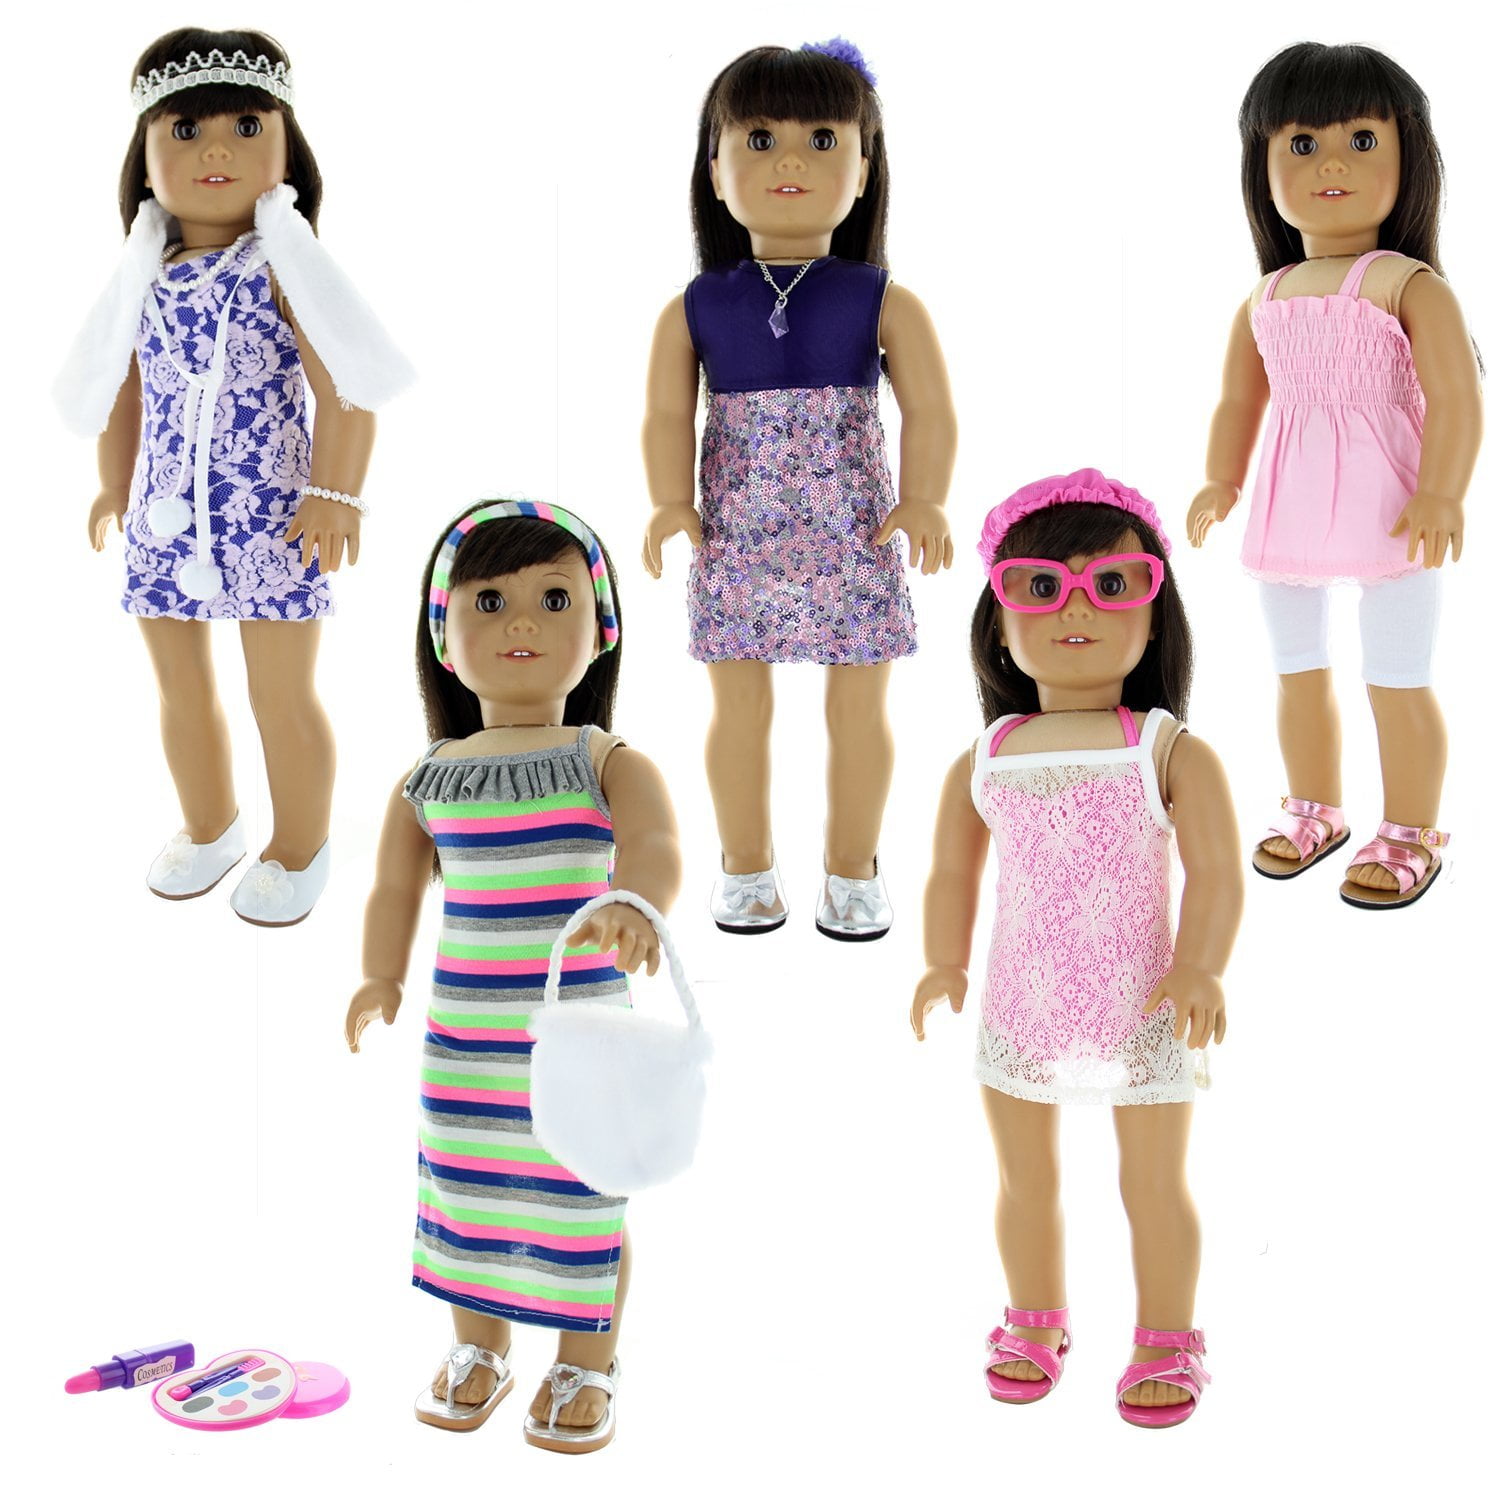 Doll Clothes - 24 Pieces Clothing Set Fits American Girl & Other 18 inch  Inch Dolls